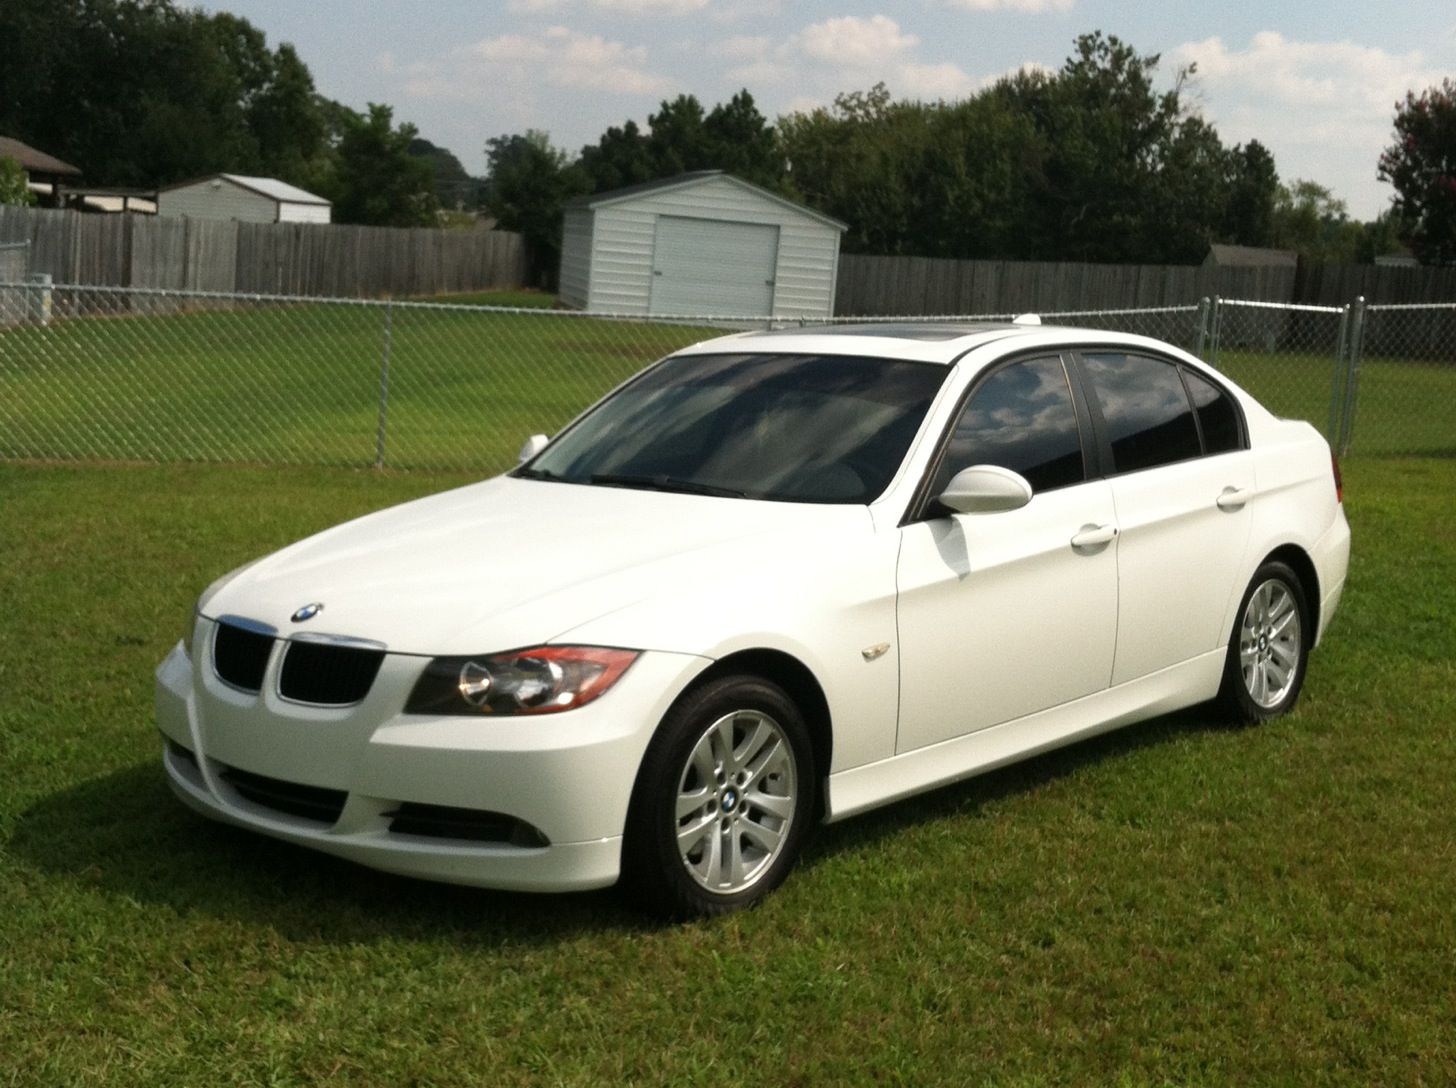 Is it beemer or beamer for a bmw #3